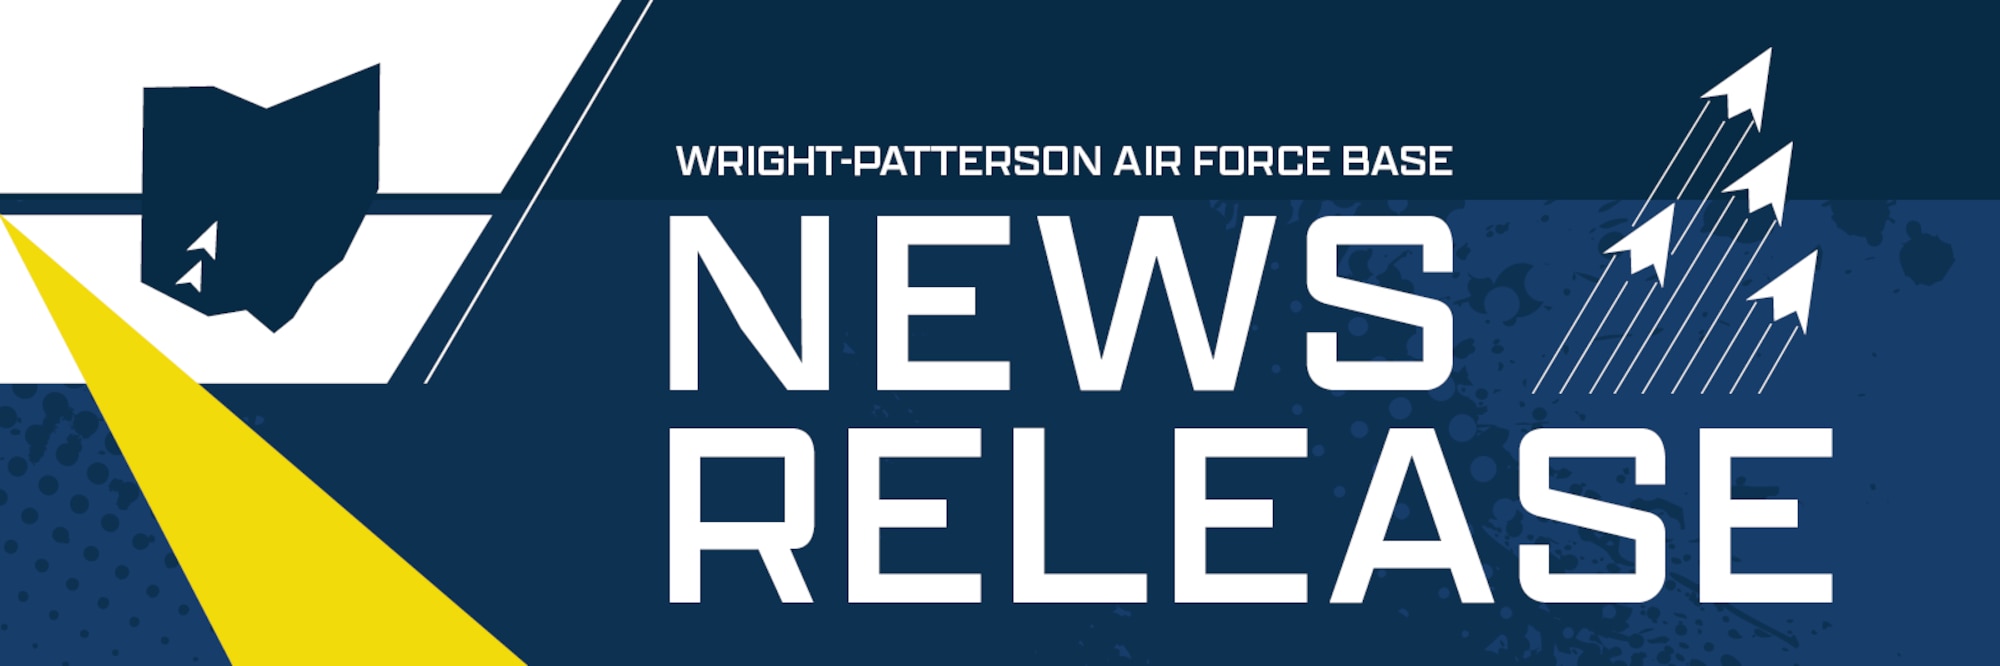 88ABW/PA NEWS RELEASE